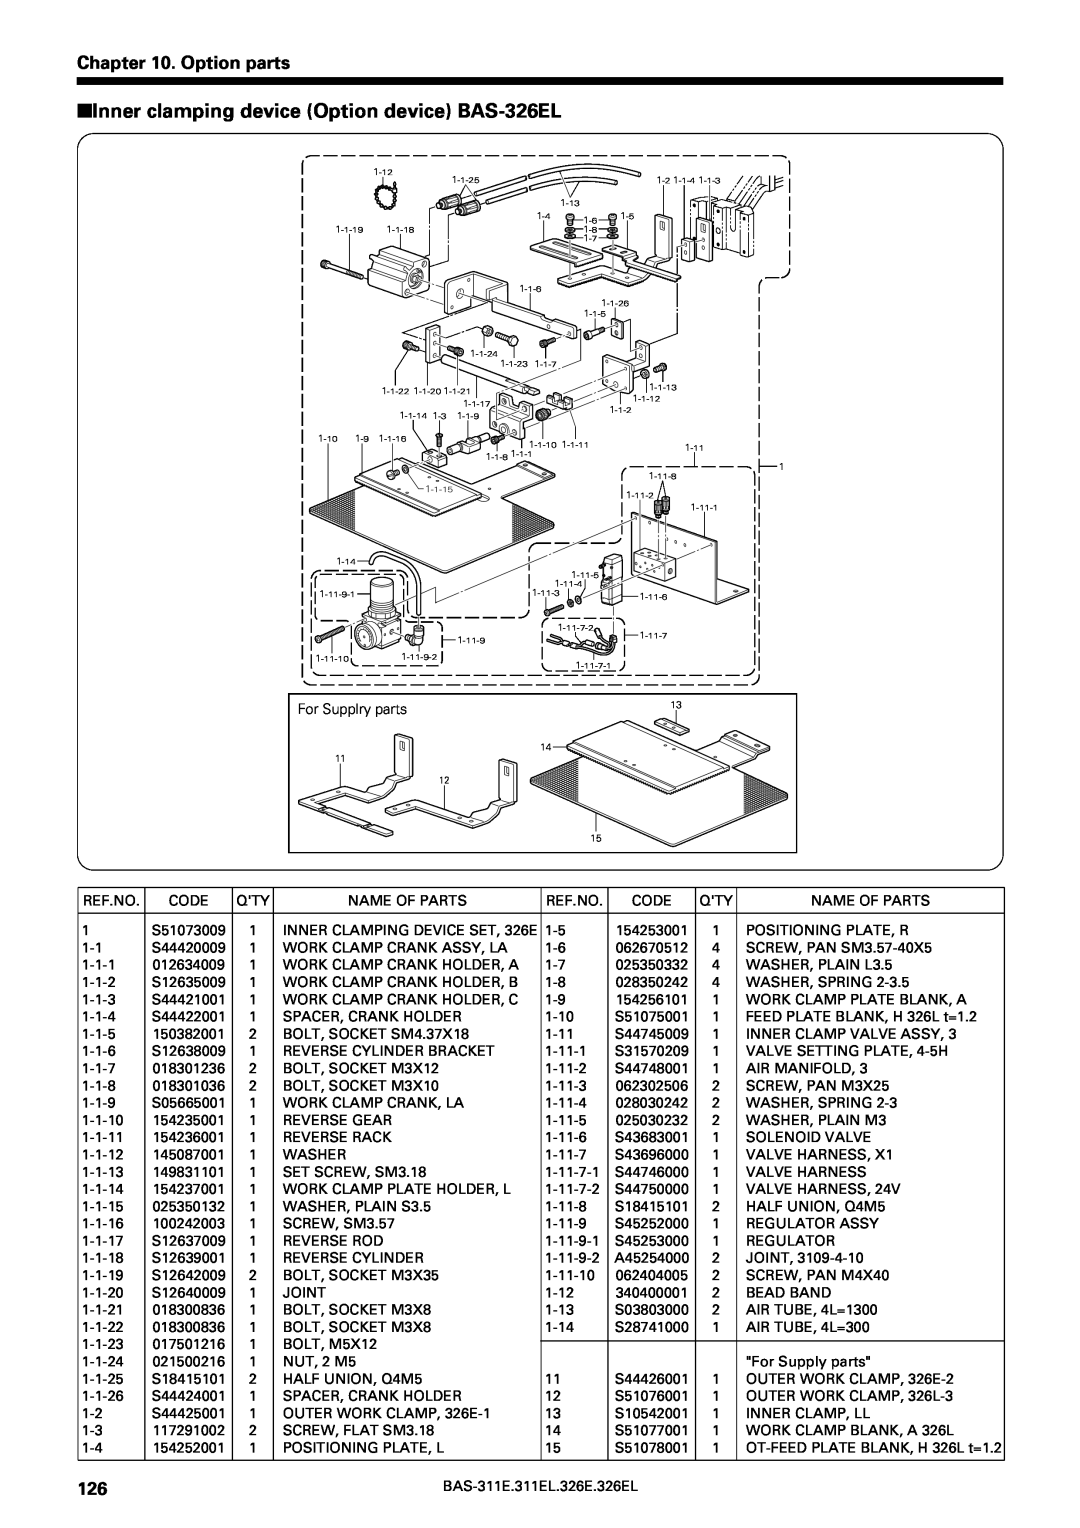 Brother BAS-311E service manual Inner clamping device Option device BAS-326EL, Option parts, For Supplry parts, A45254000 